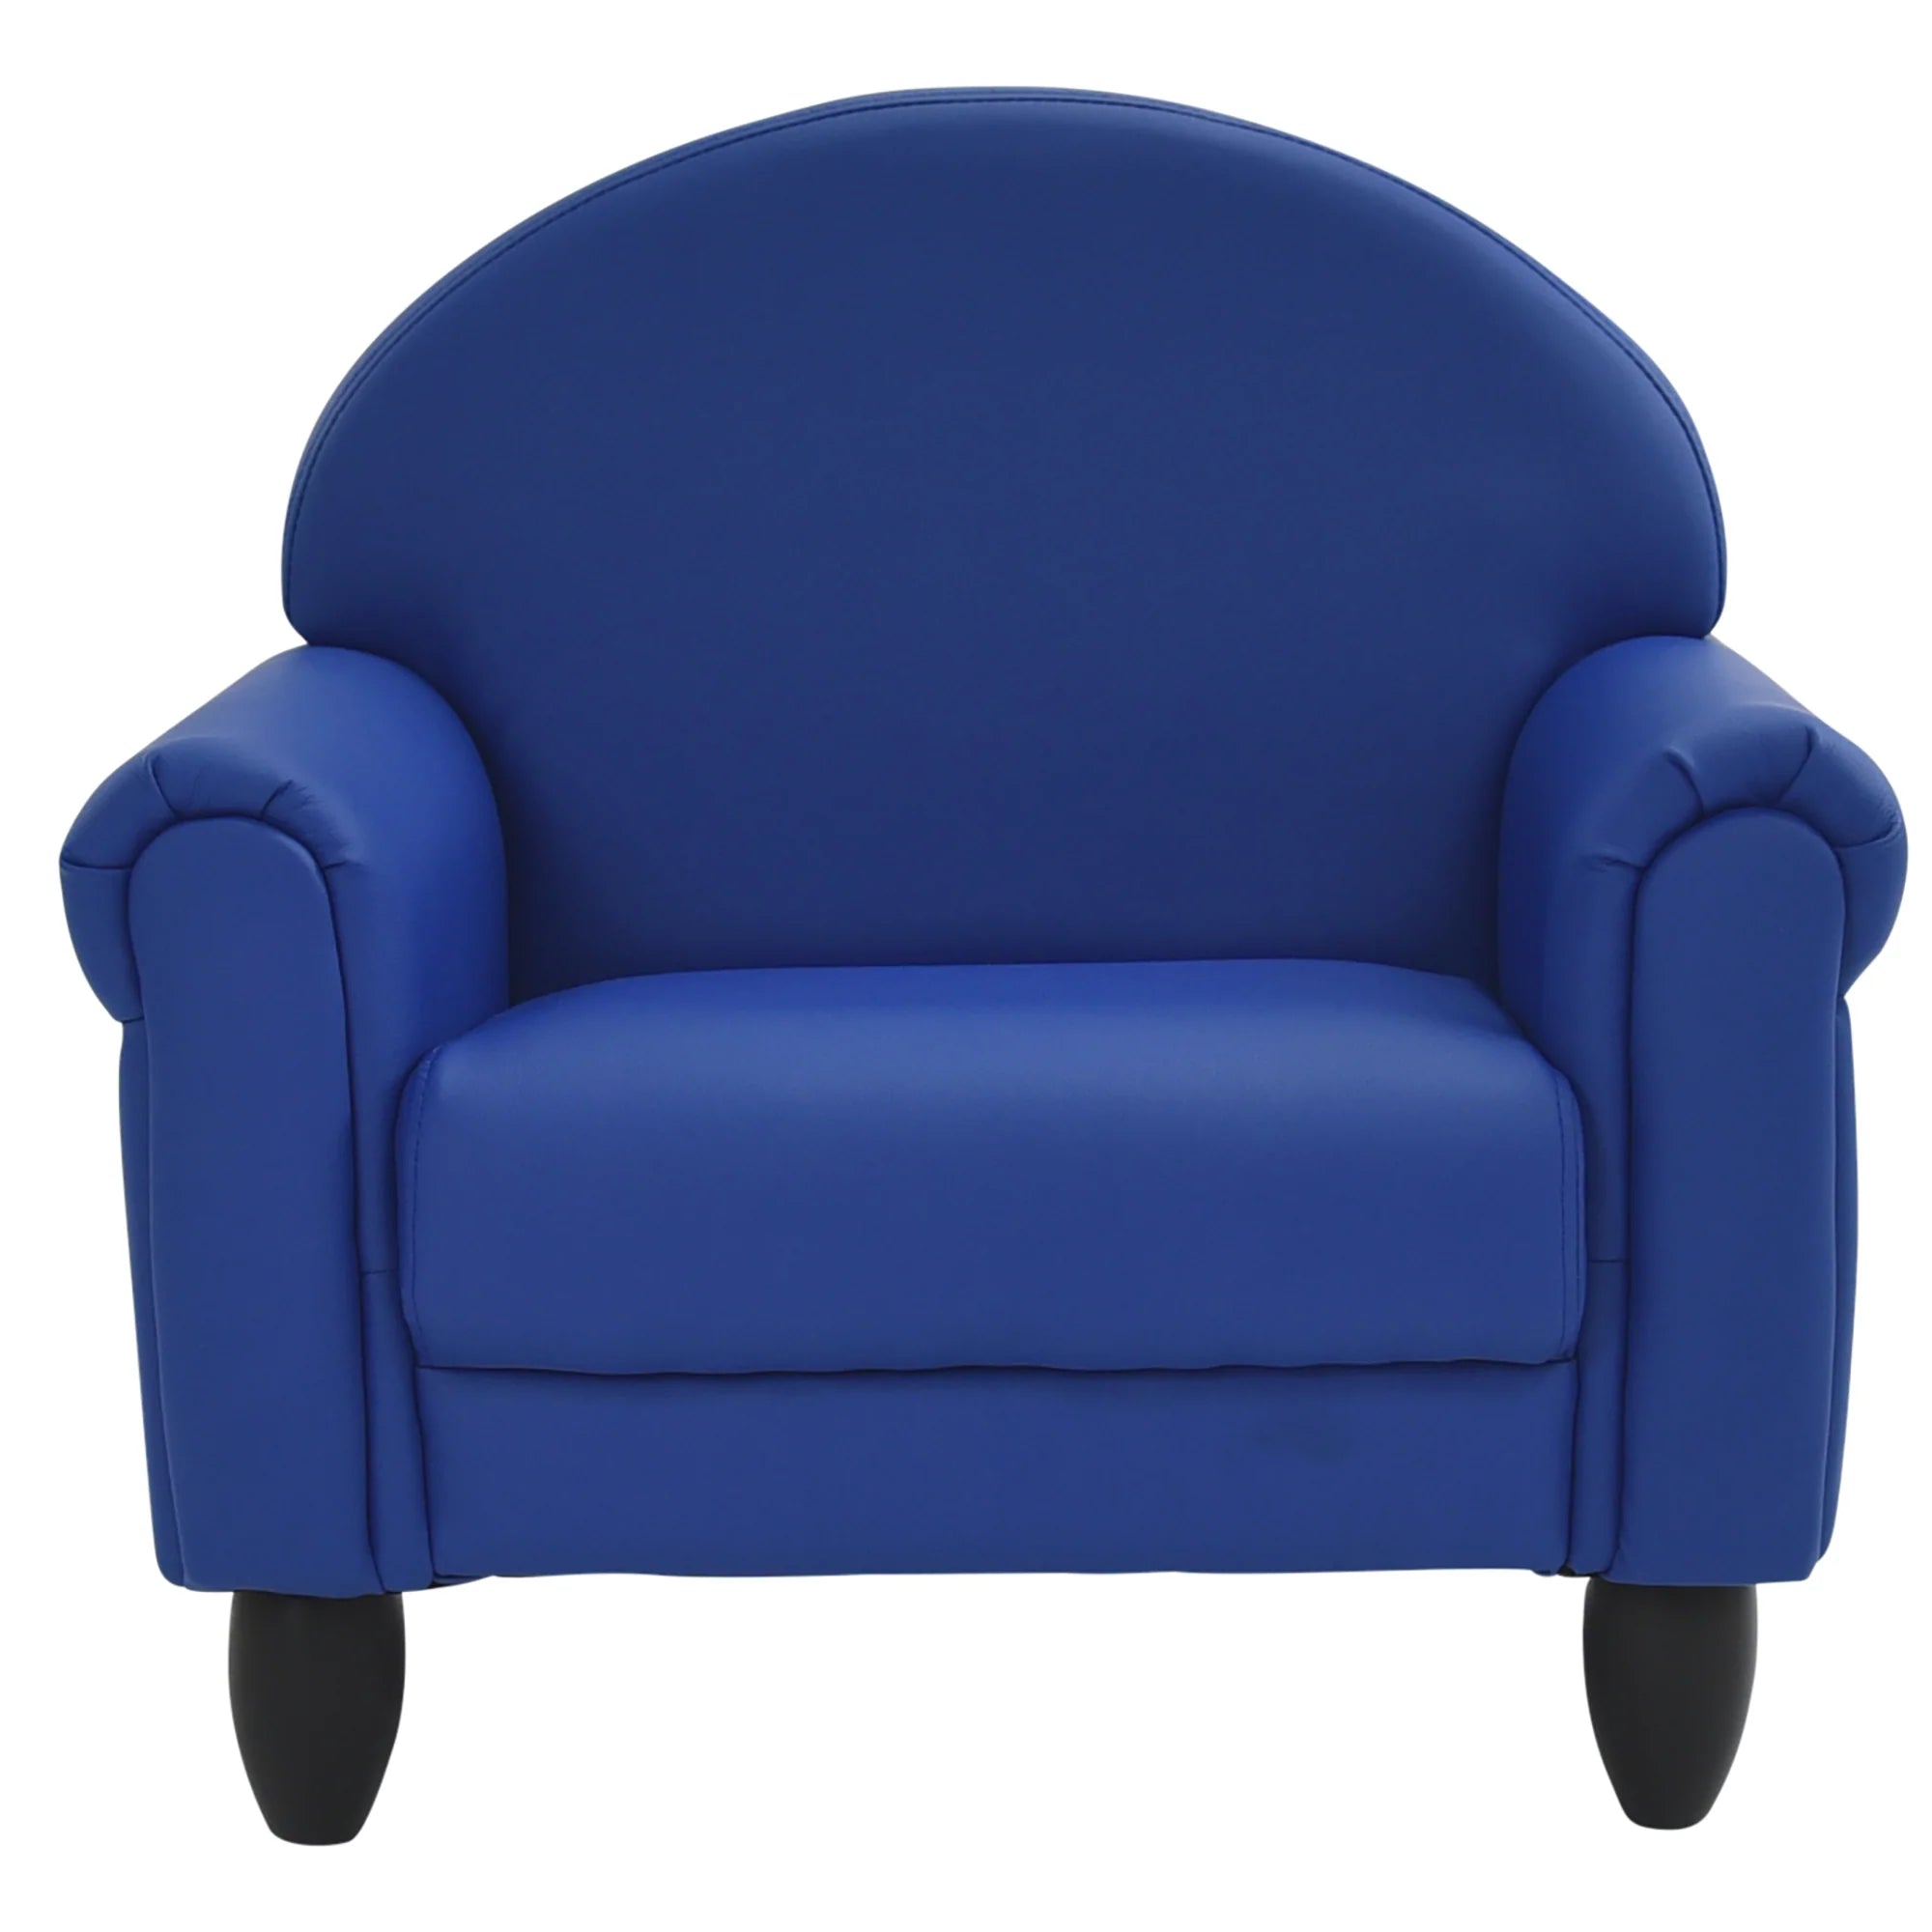 As We Grow™ Chair - Primary Blue